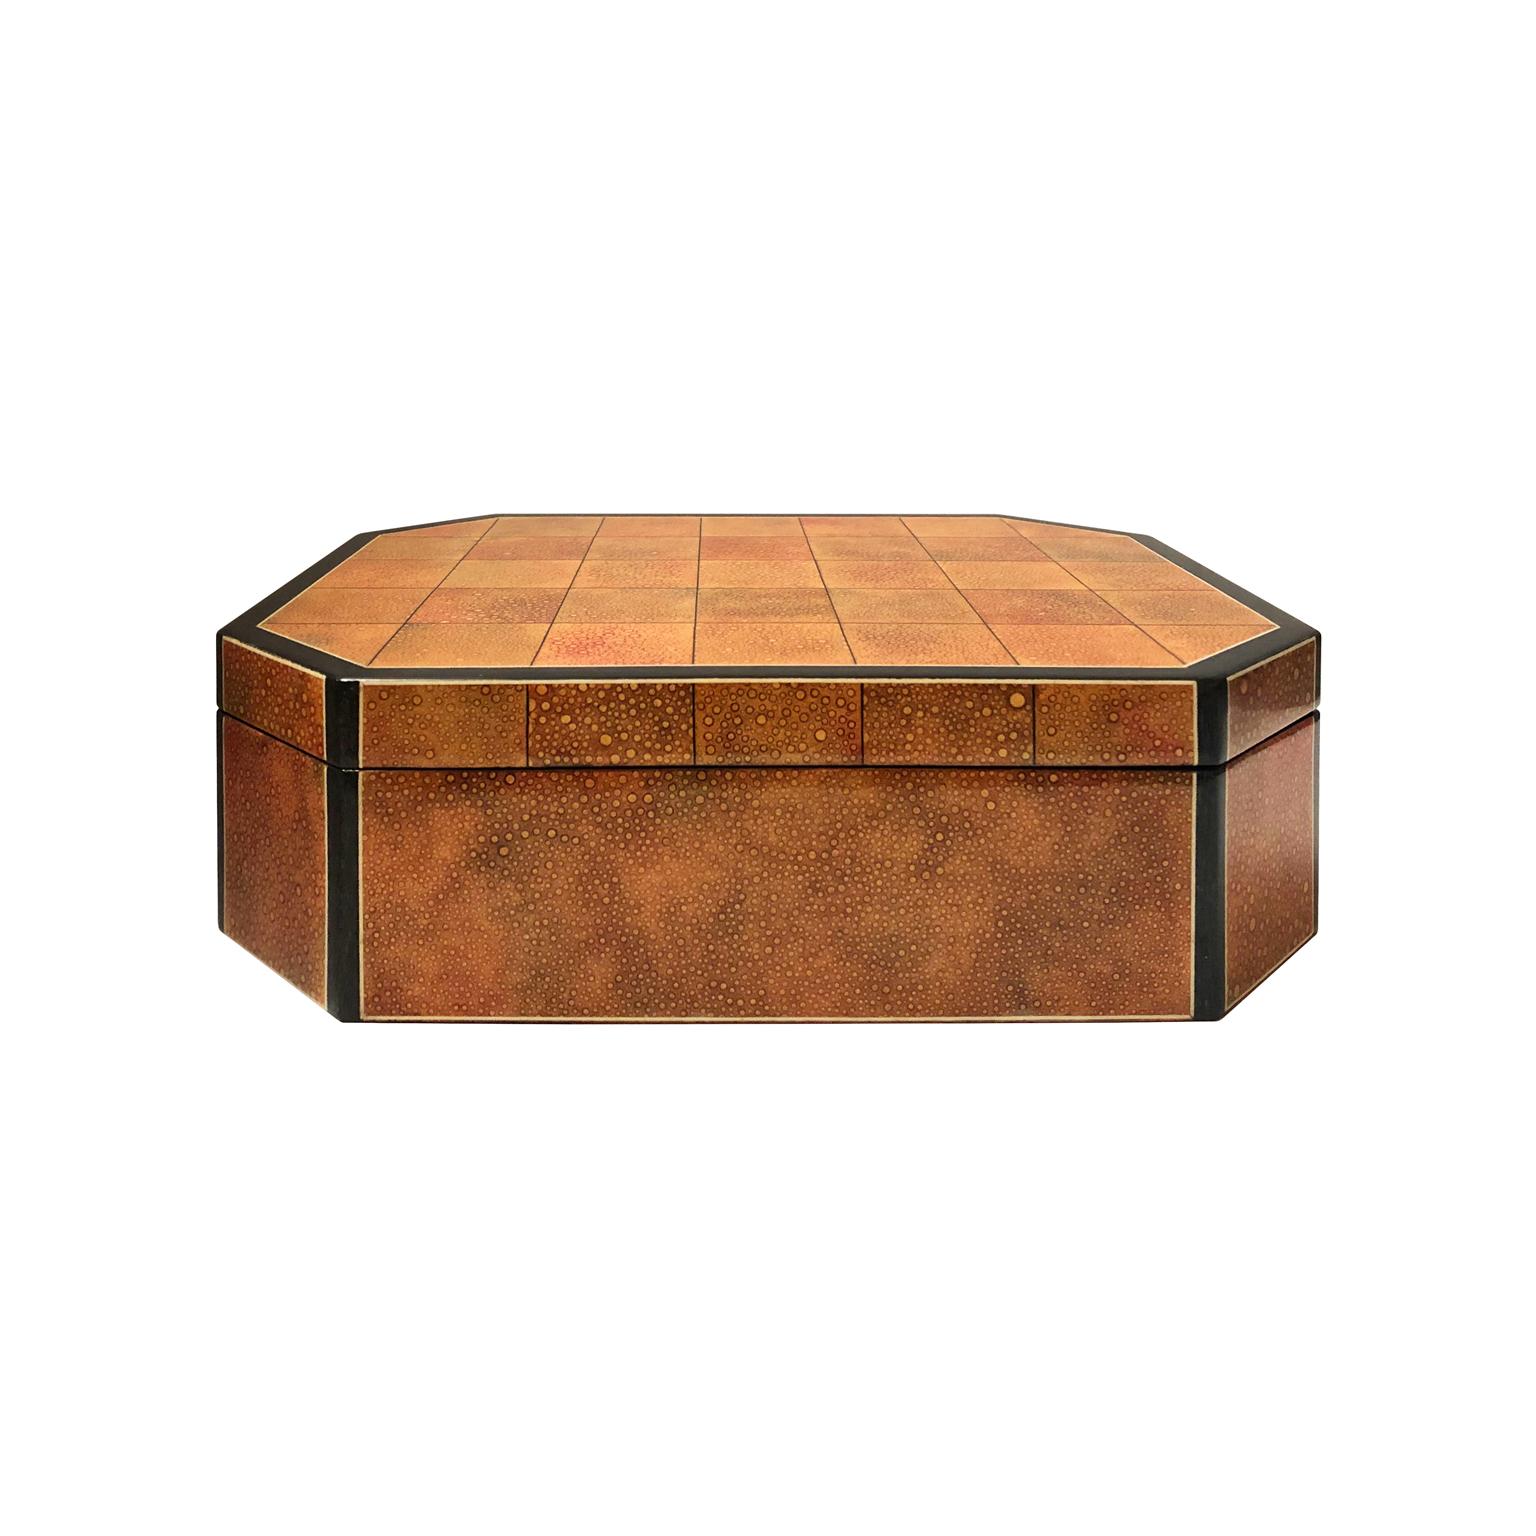 Polished coral stone cut-corner box with hinged lid. USA, 1970s.